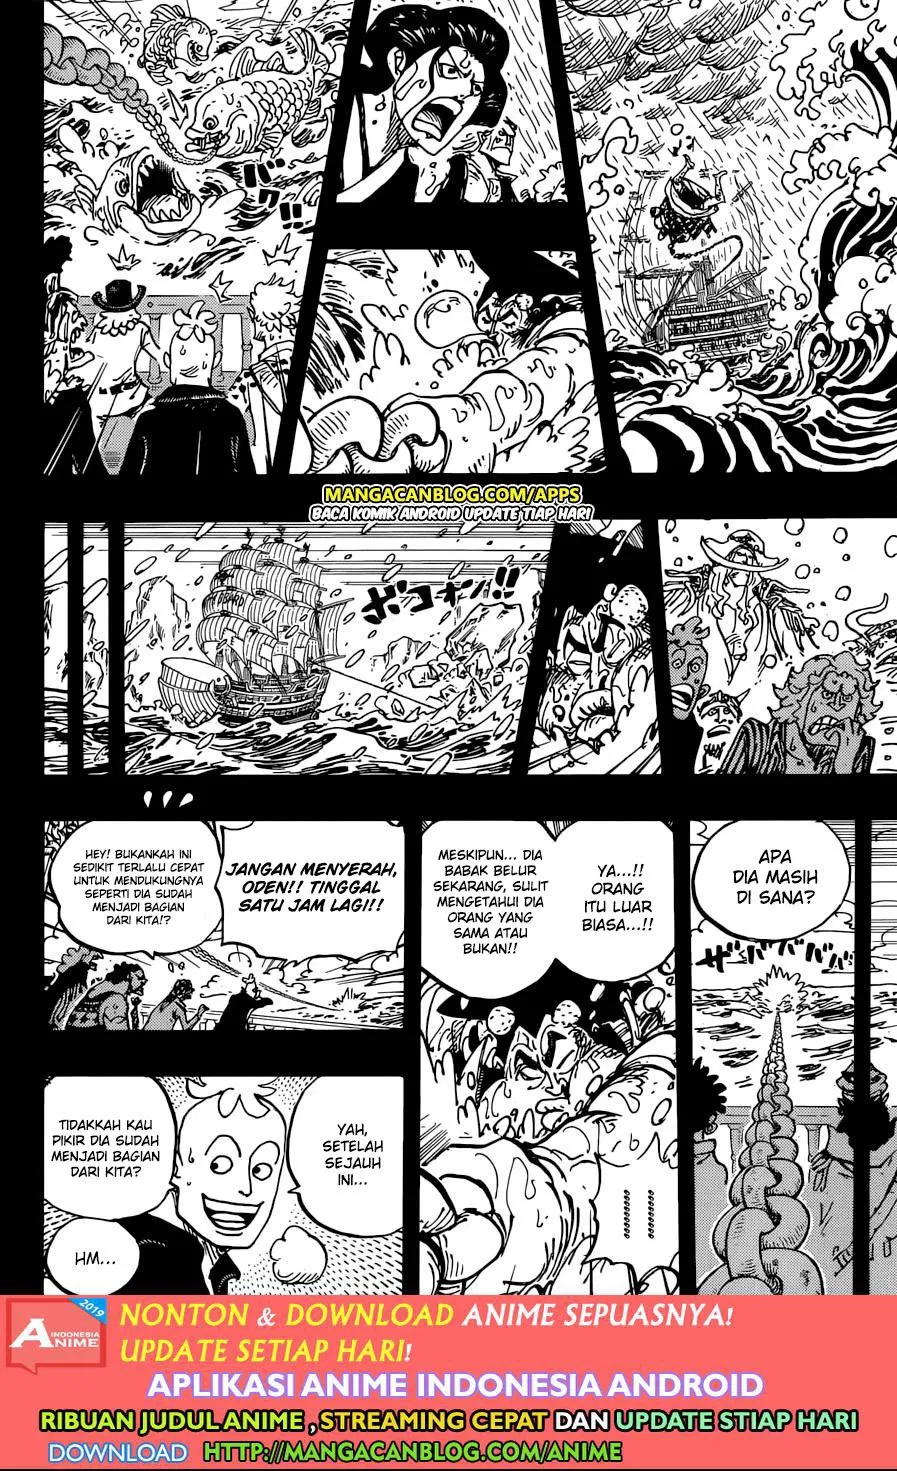 One Piece Chapter 964